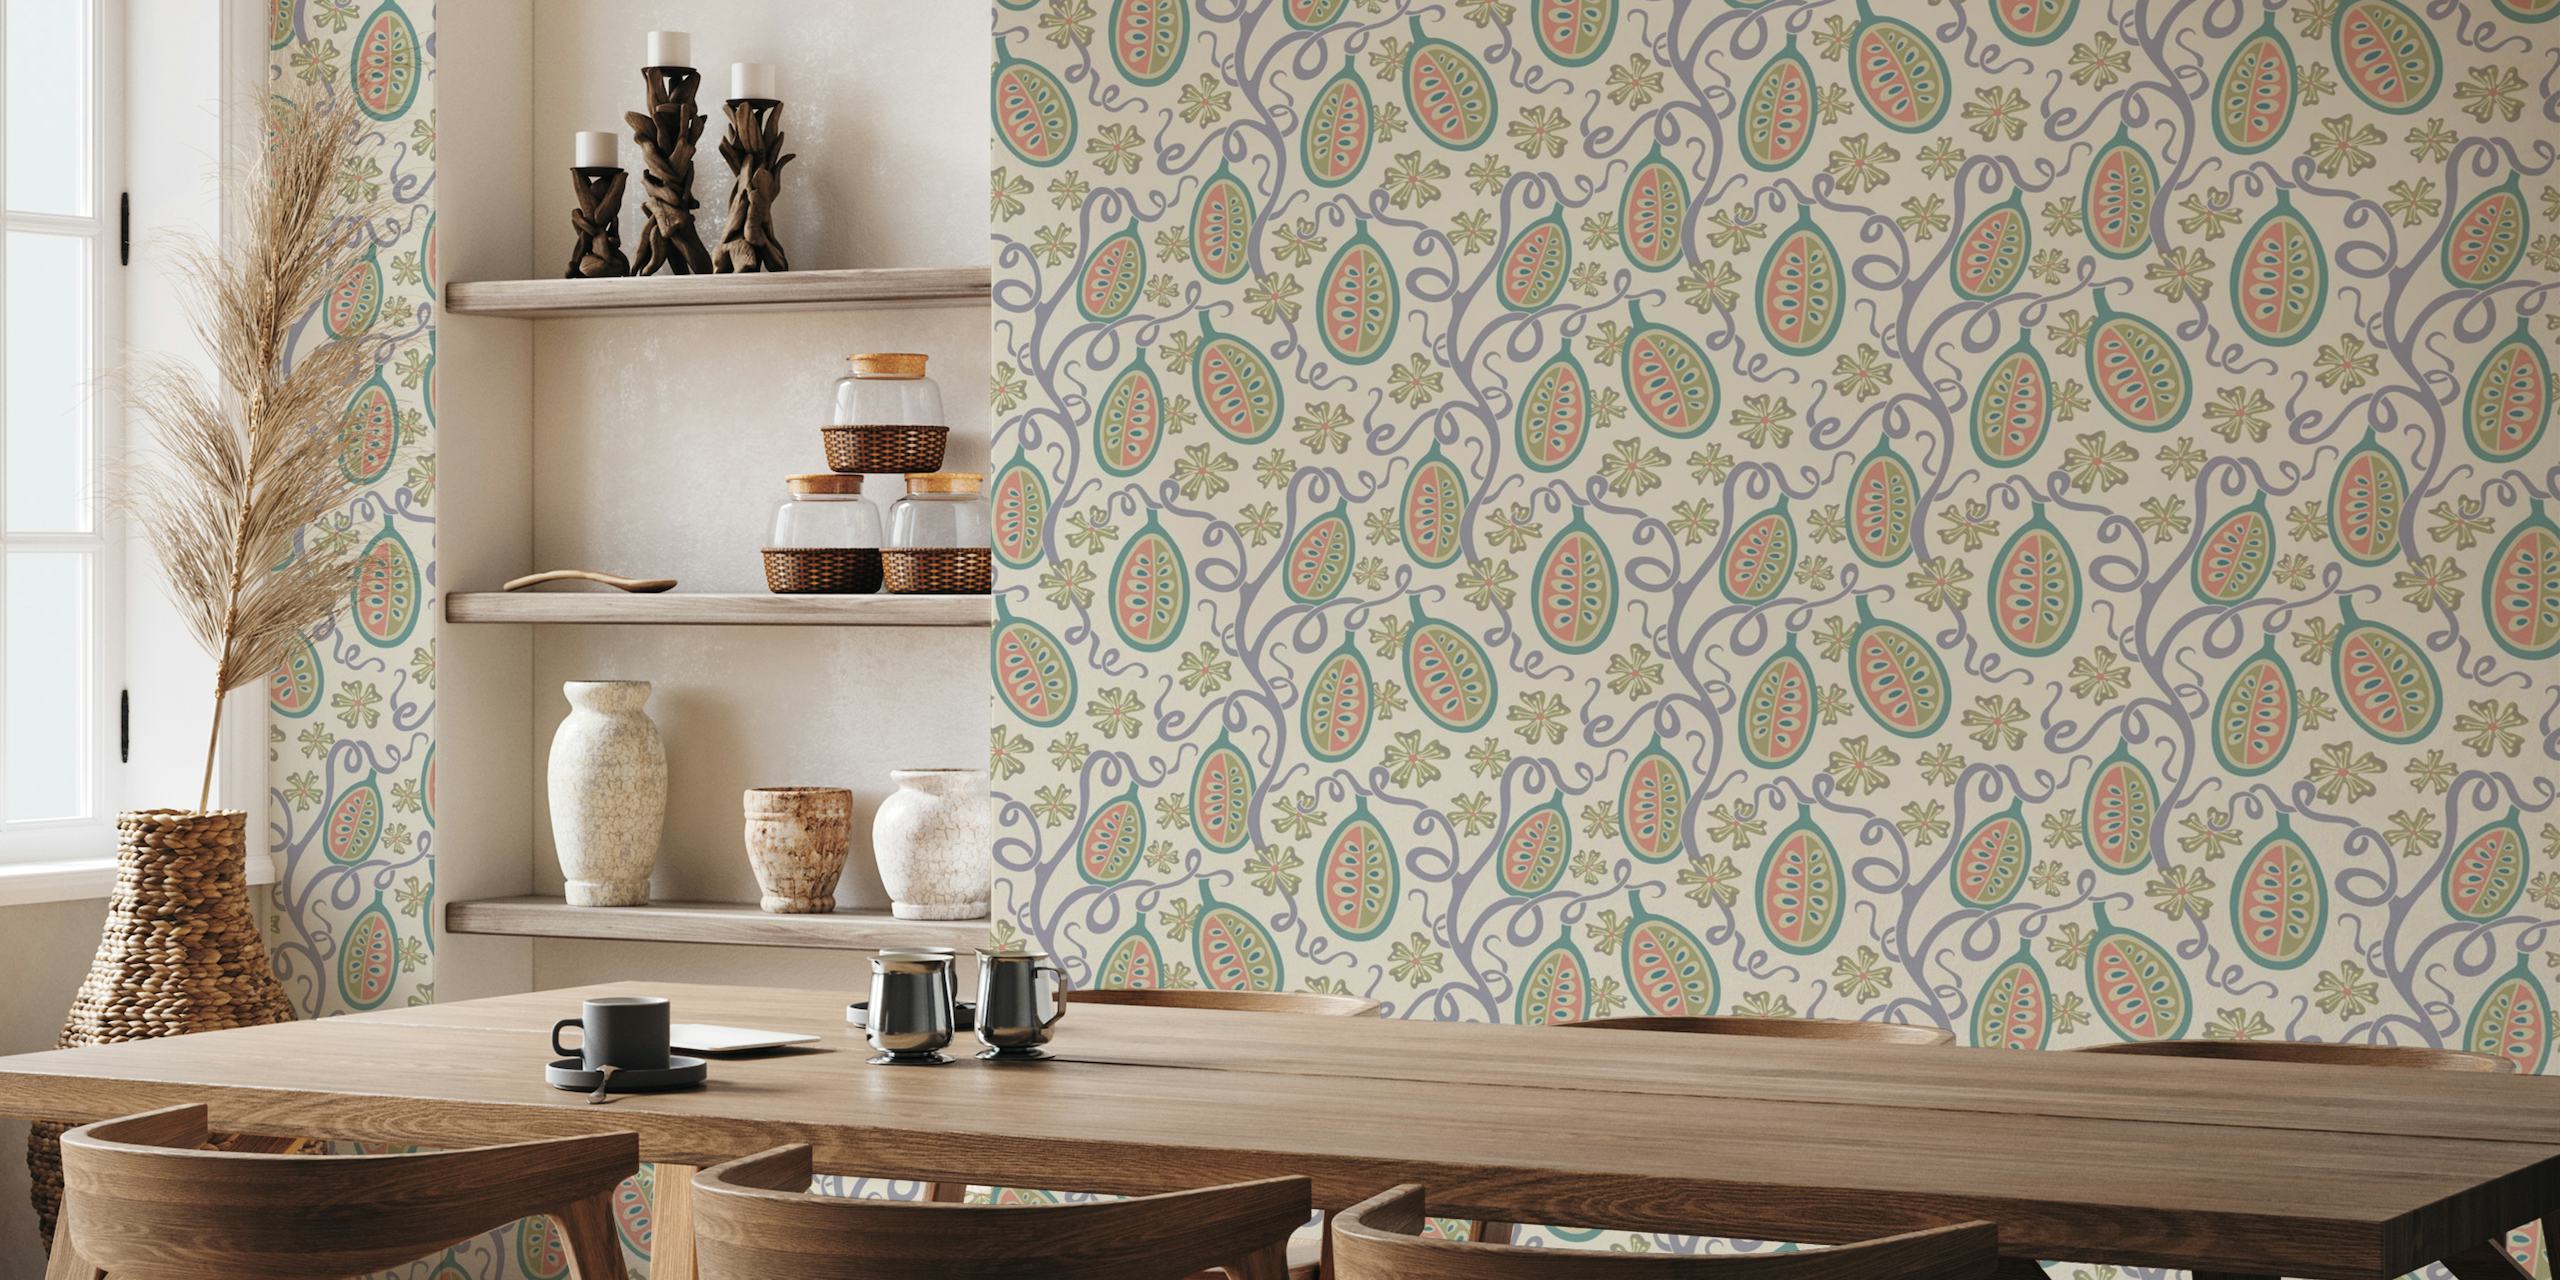 AMBROSIA Fantasy Mod Floral Fruit Pastels wall mural with a pastel-colored floral and fruit pattern on a neutral background.